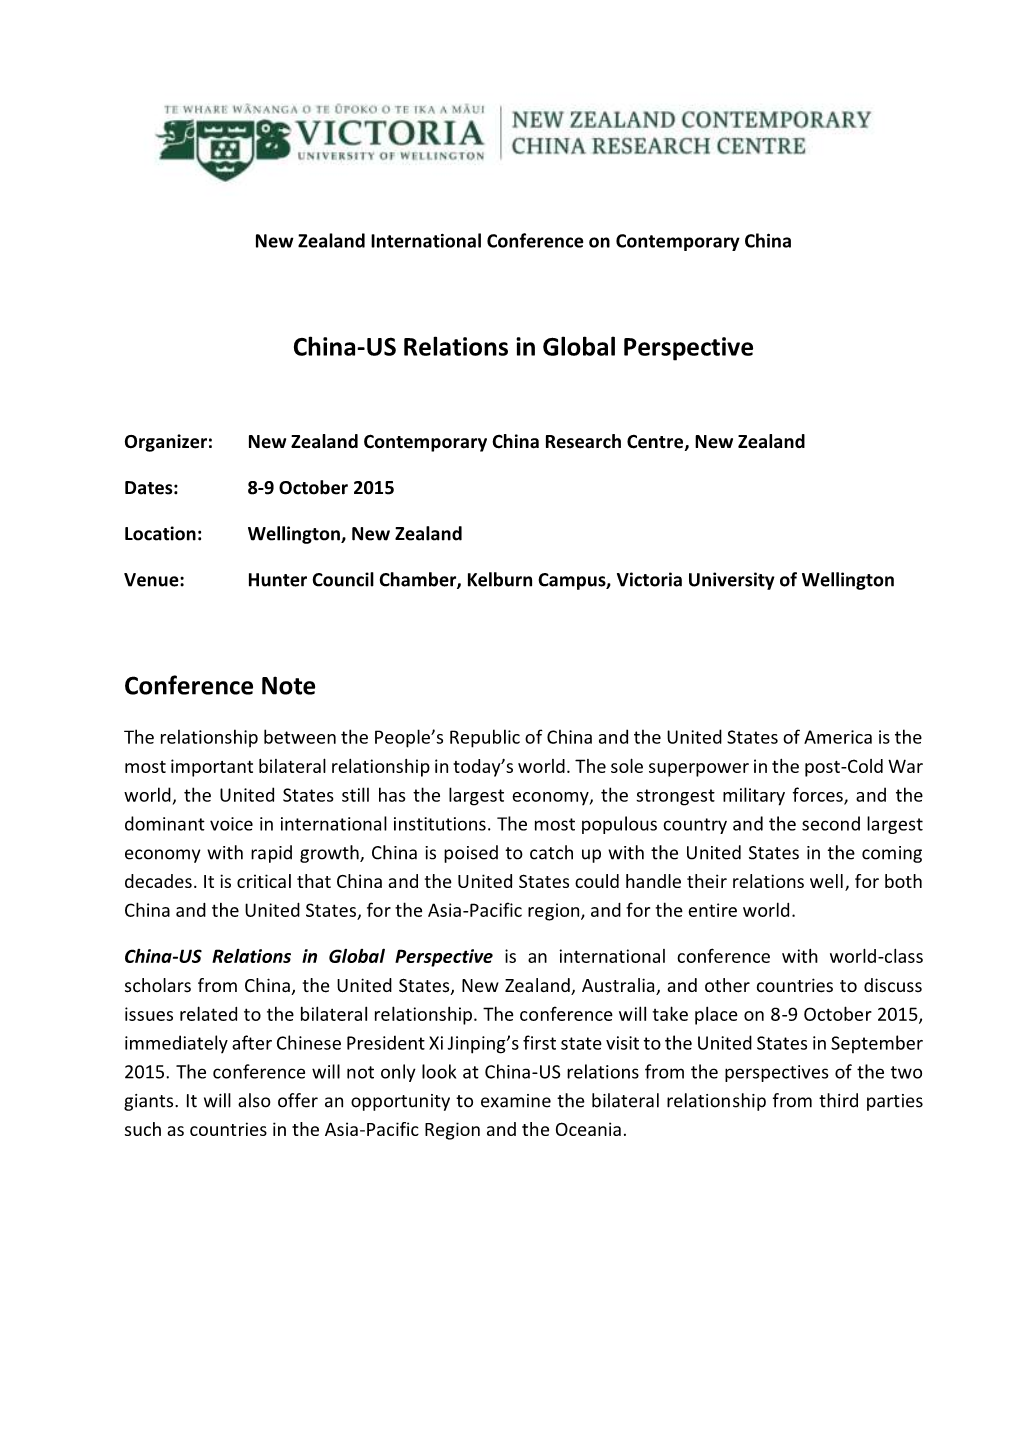 China-US Relations in Global Perspective Conference Note